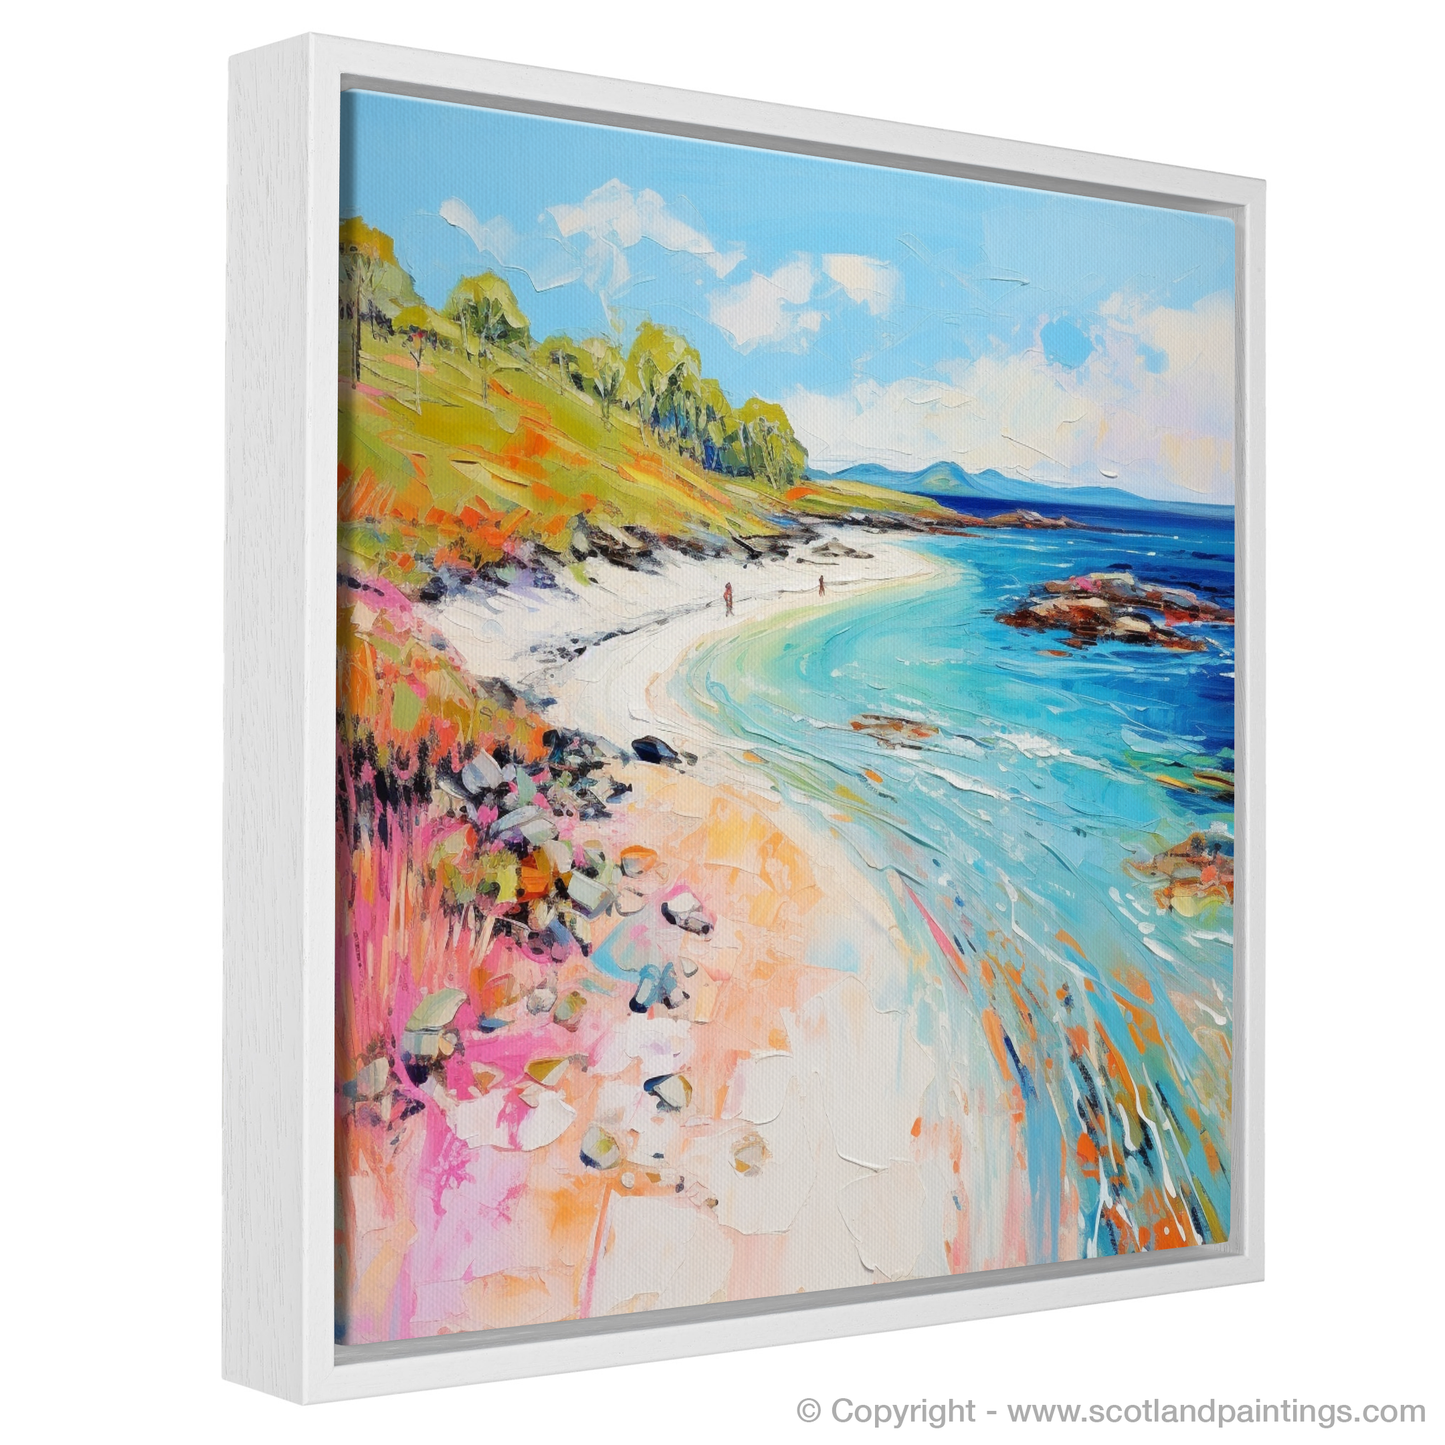 Painting and Art Print of Coral Beach, Isle of Skye in summer entitled "Summer Serenity at Coral Beach".